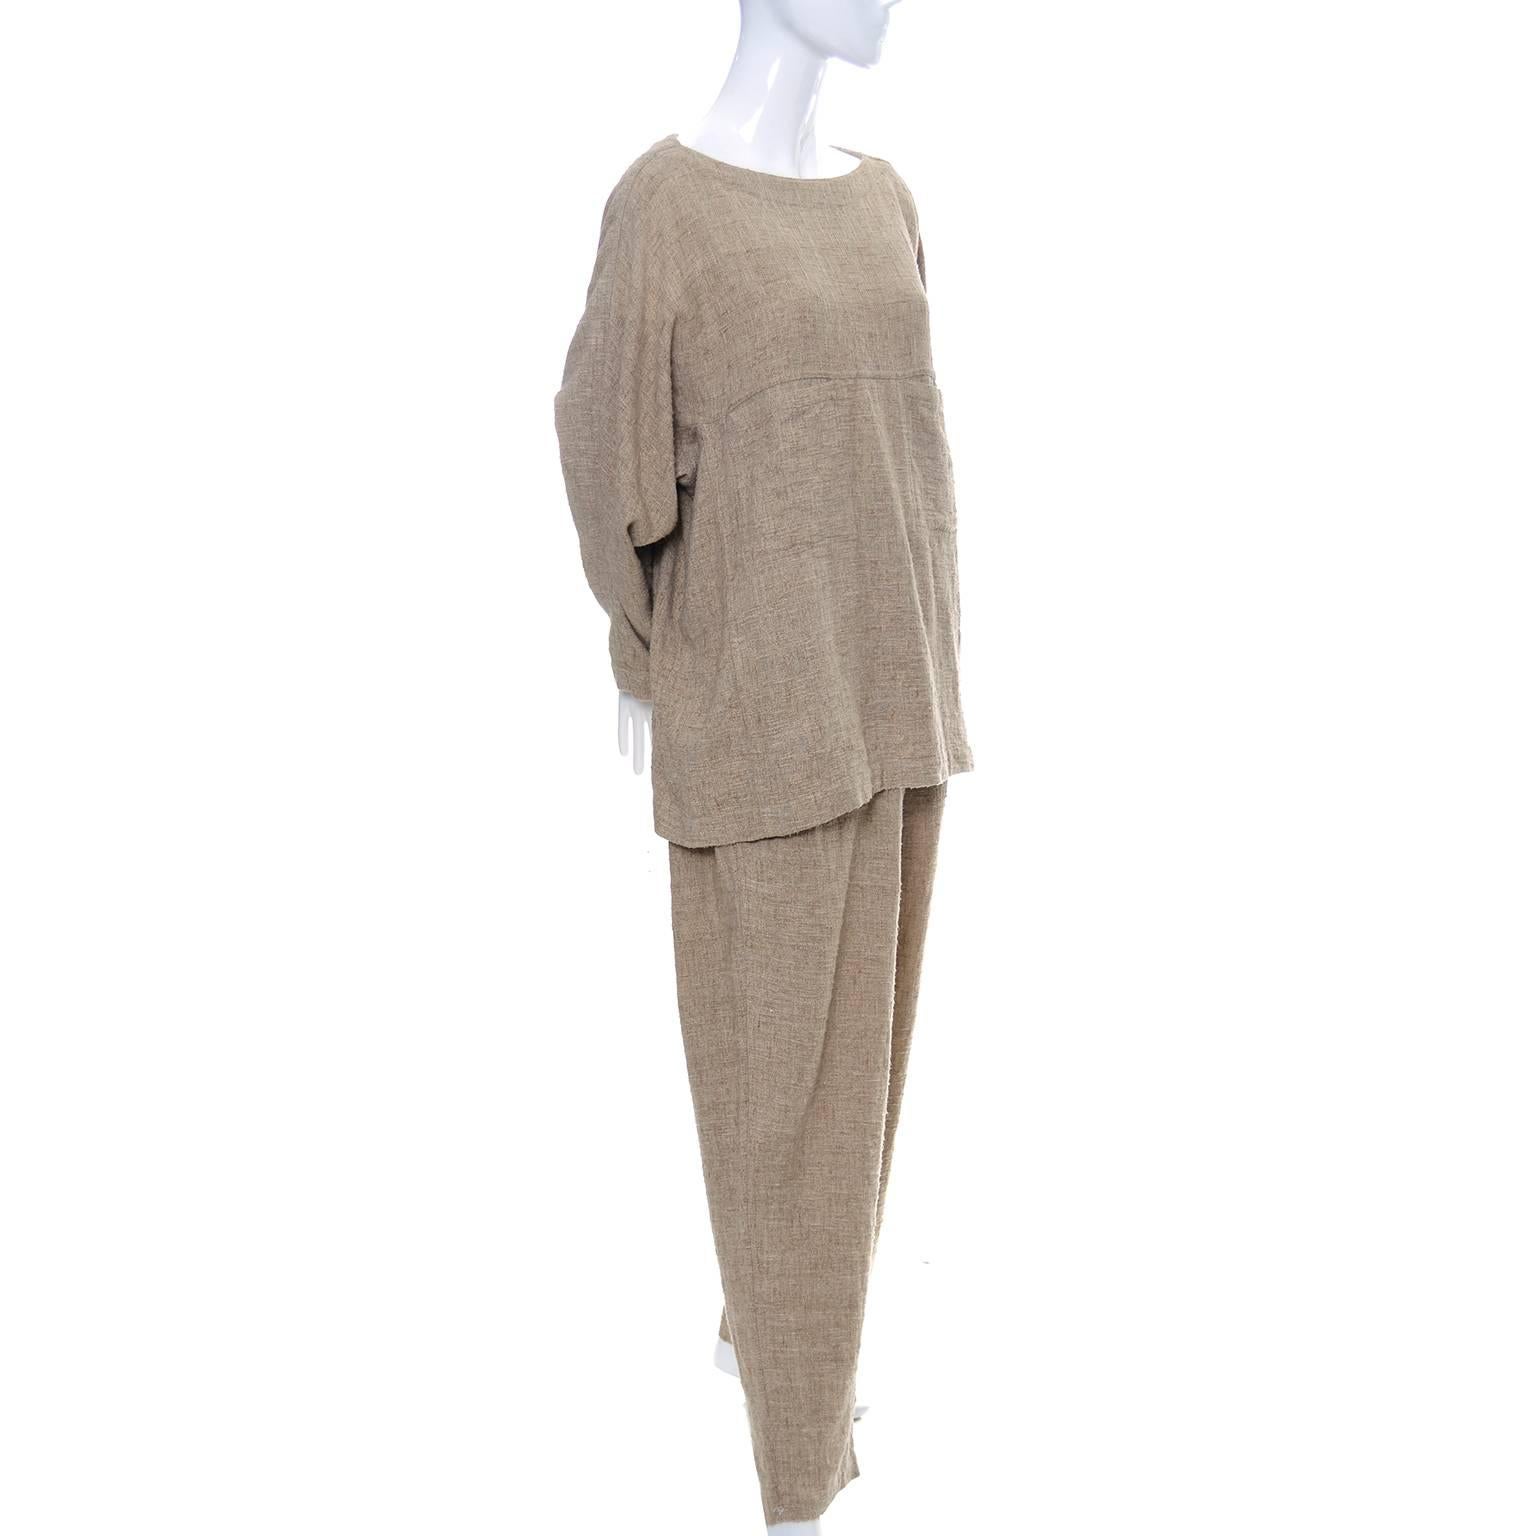 Brown Vintage Issey Miyake Textured Cotton Tunic High Waist Pants Outfit 1980s Medium